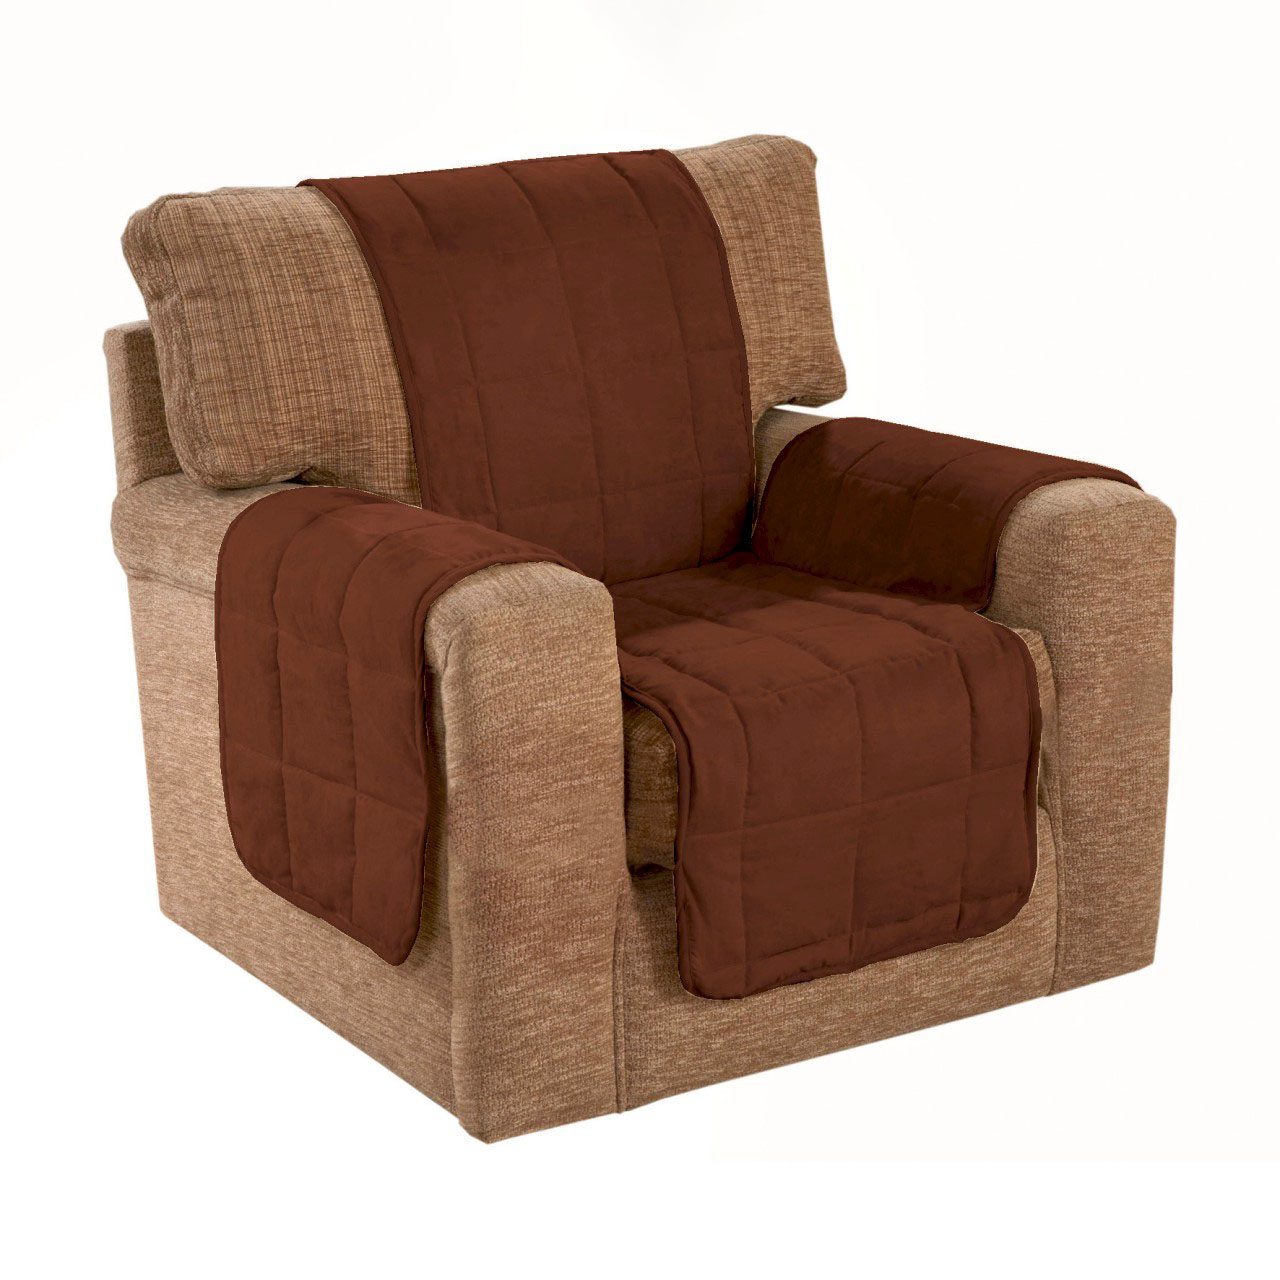 Faux Suede Armchair Protector Cover